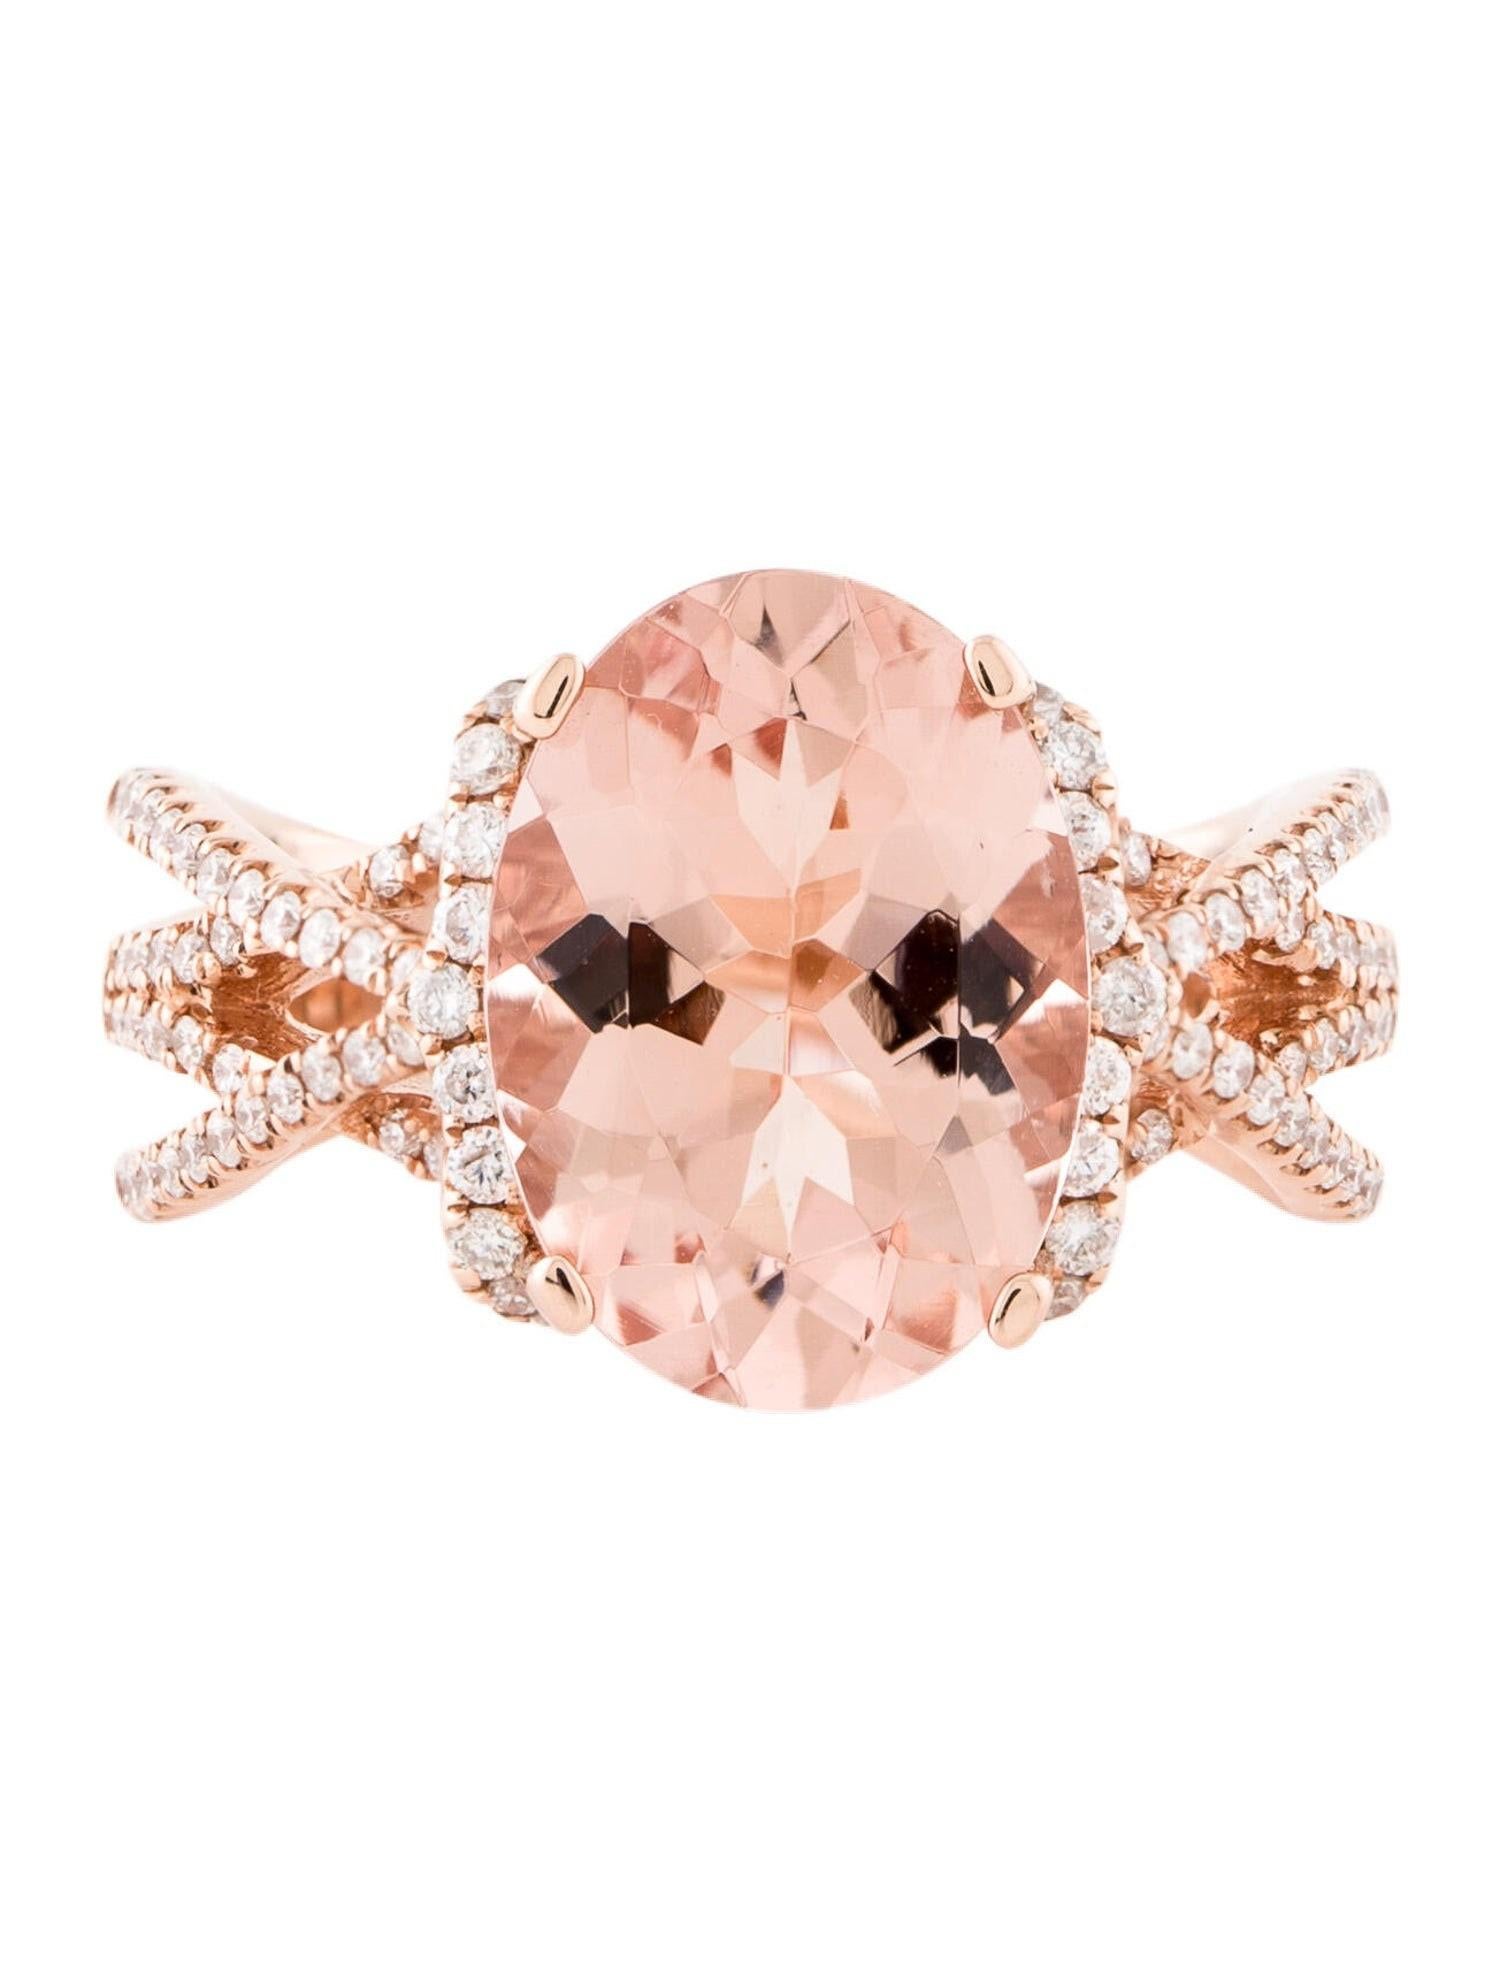 This is a magnificent natural morganite and diamond ring set in solid 14K rose gold. The natural 14X10MM Morganite oval has an excellent peachy pink color (AAA quality gem) and is set on top of a gorgeous diamond encrusted shank. The ring is stamped